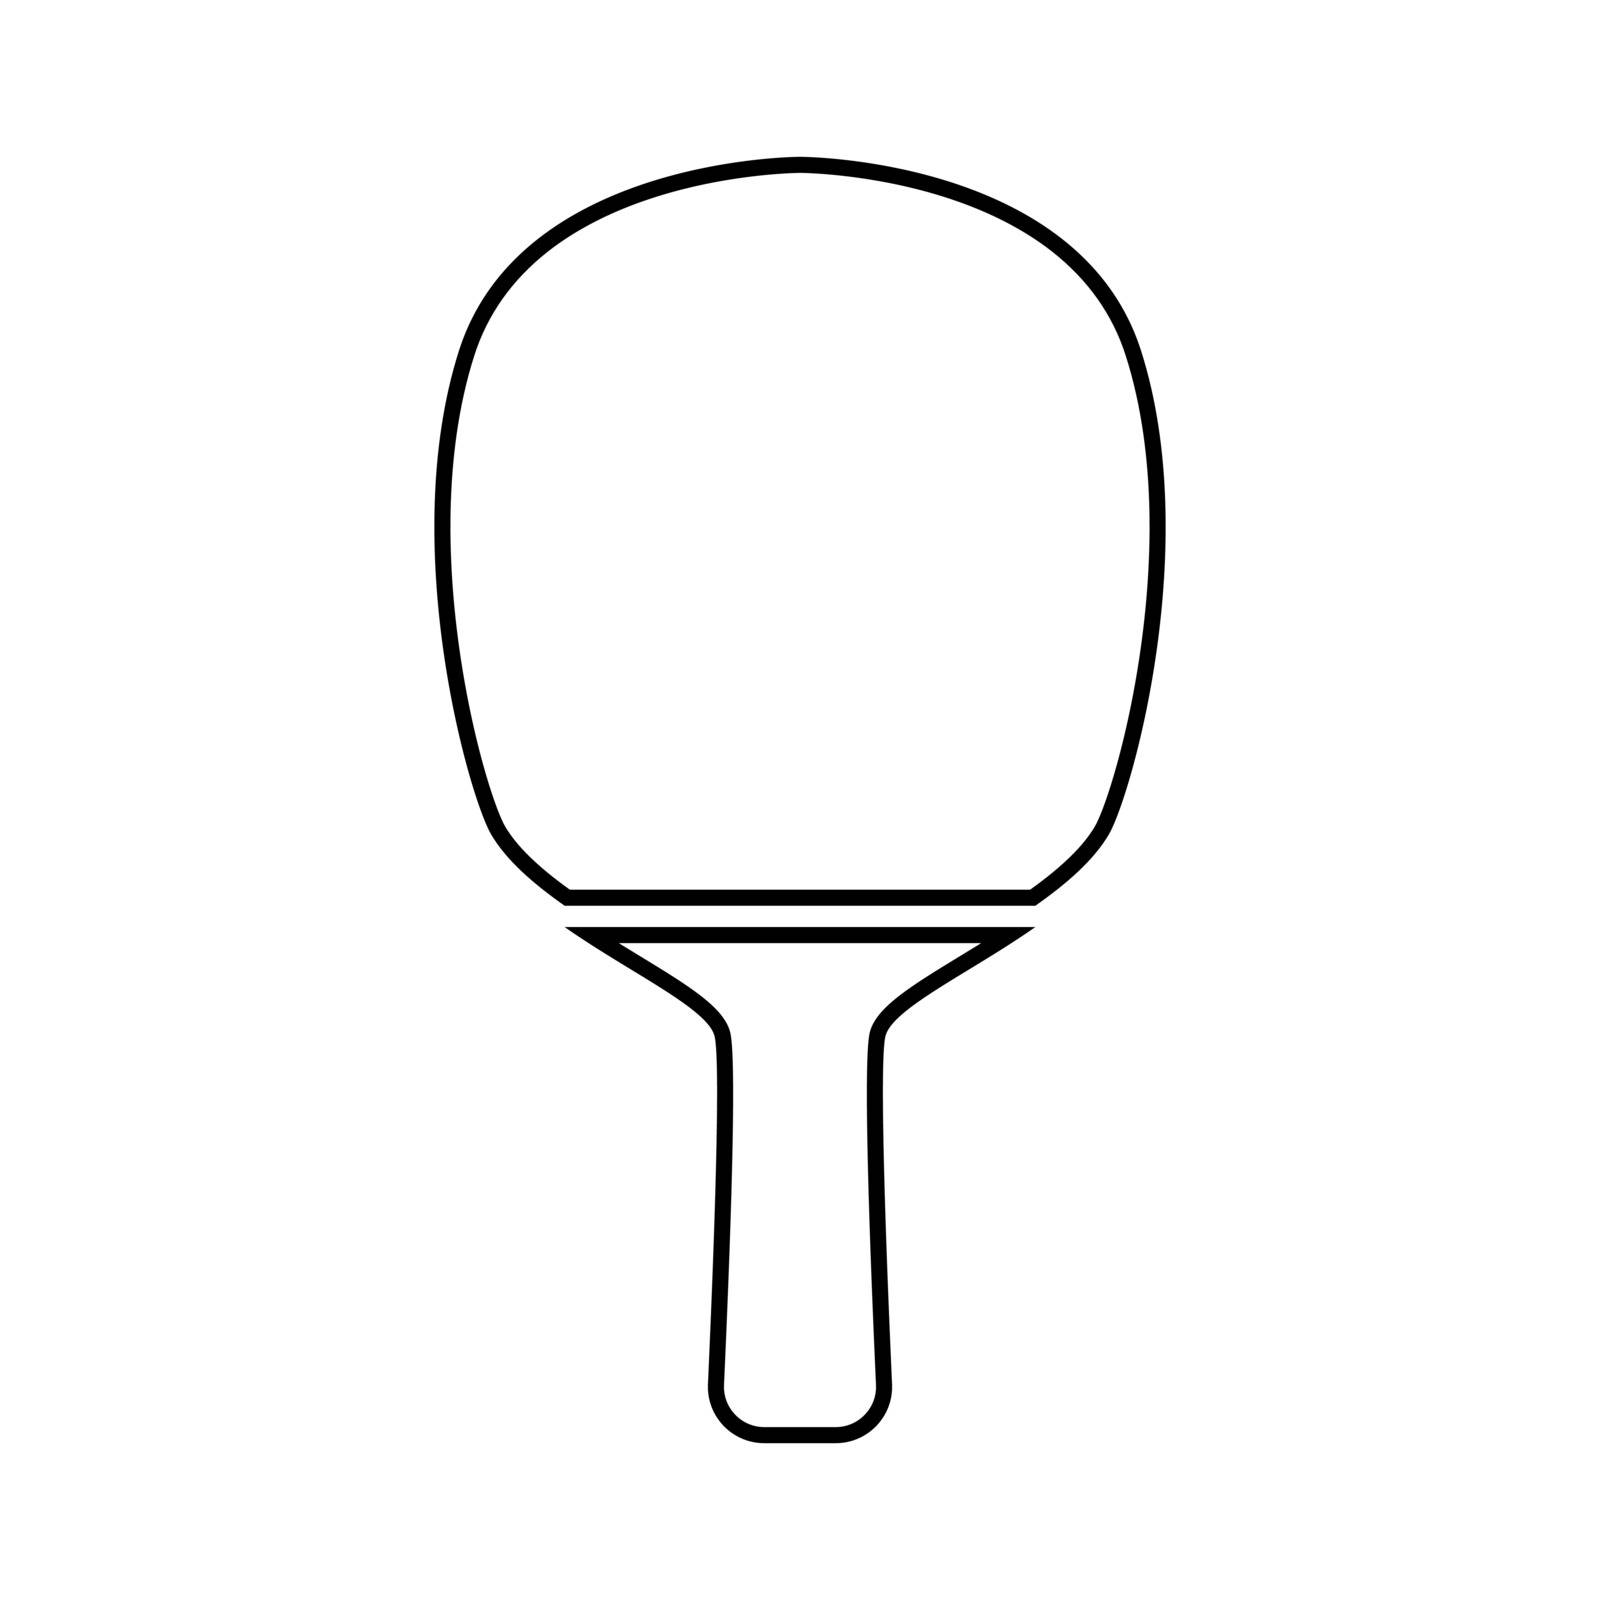 Rocket of a table tennis it is black icon . Simple style .